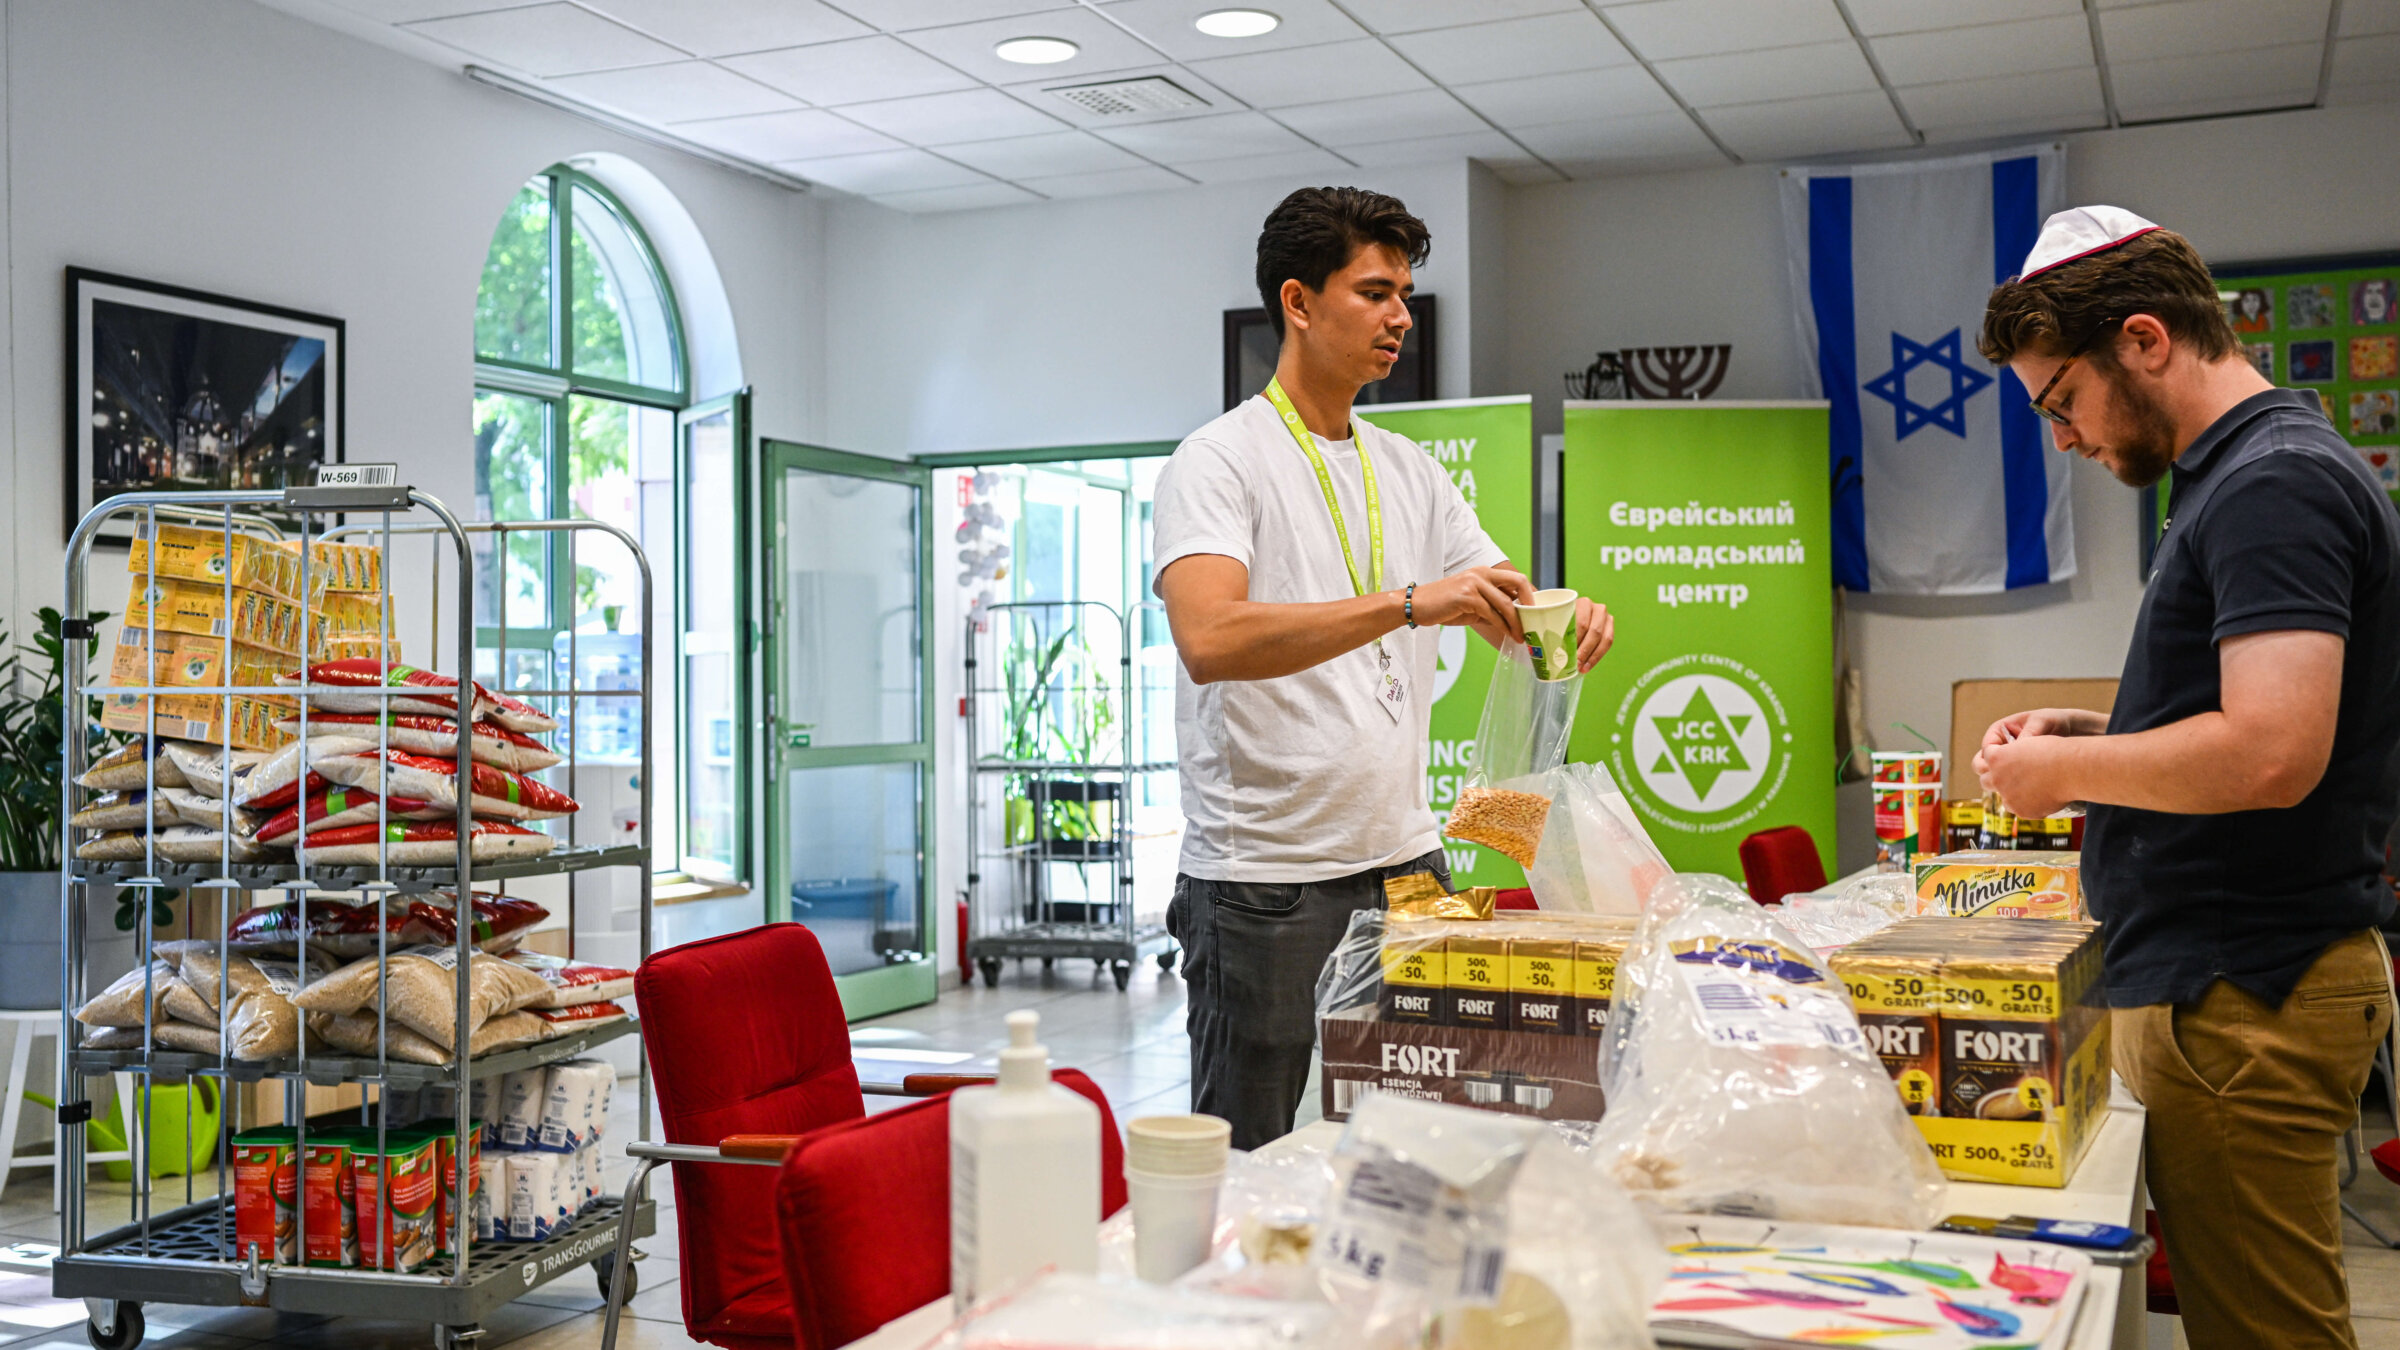 Volunteers from the Jewish community prepare donation packages at the Jewish Community Center on July 15, 2022 in Krakow, Poland. 